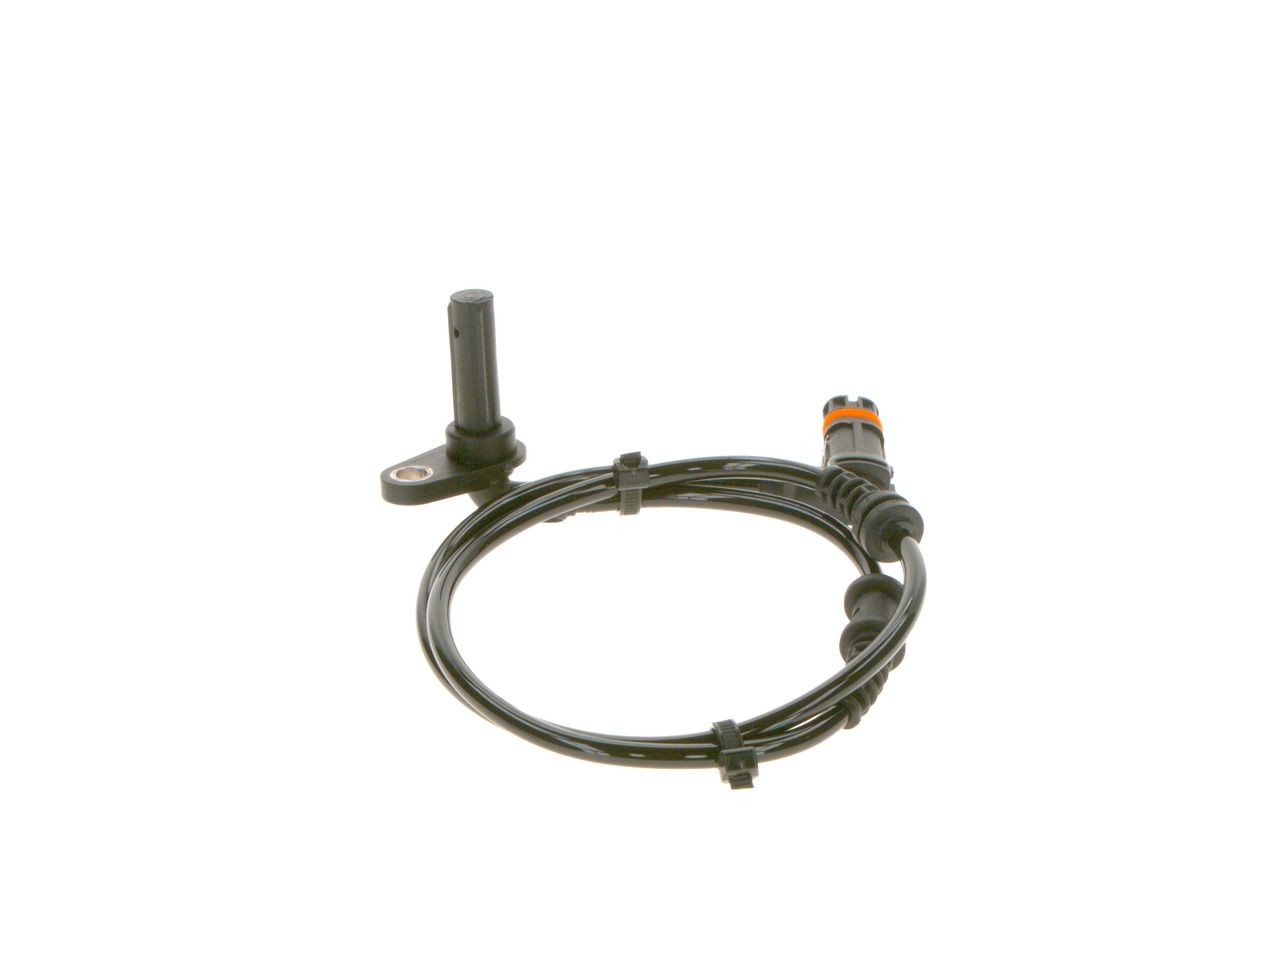 BOSCH 0265008135 ABS sensor with cable, Hall Sensor, 725mm